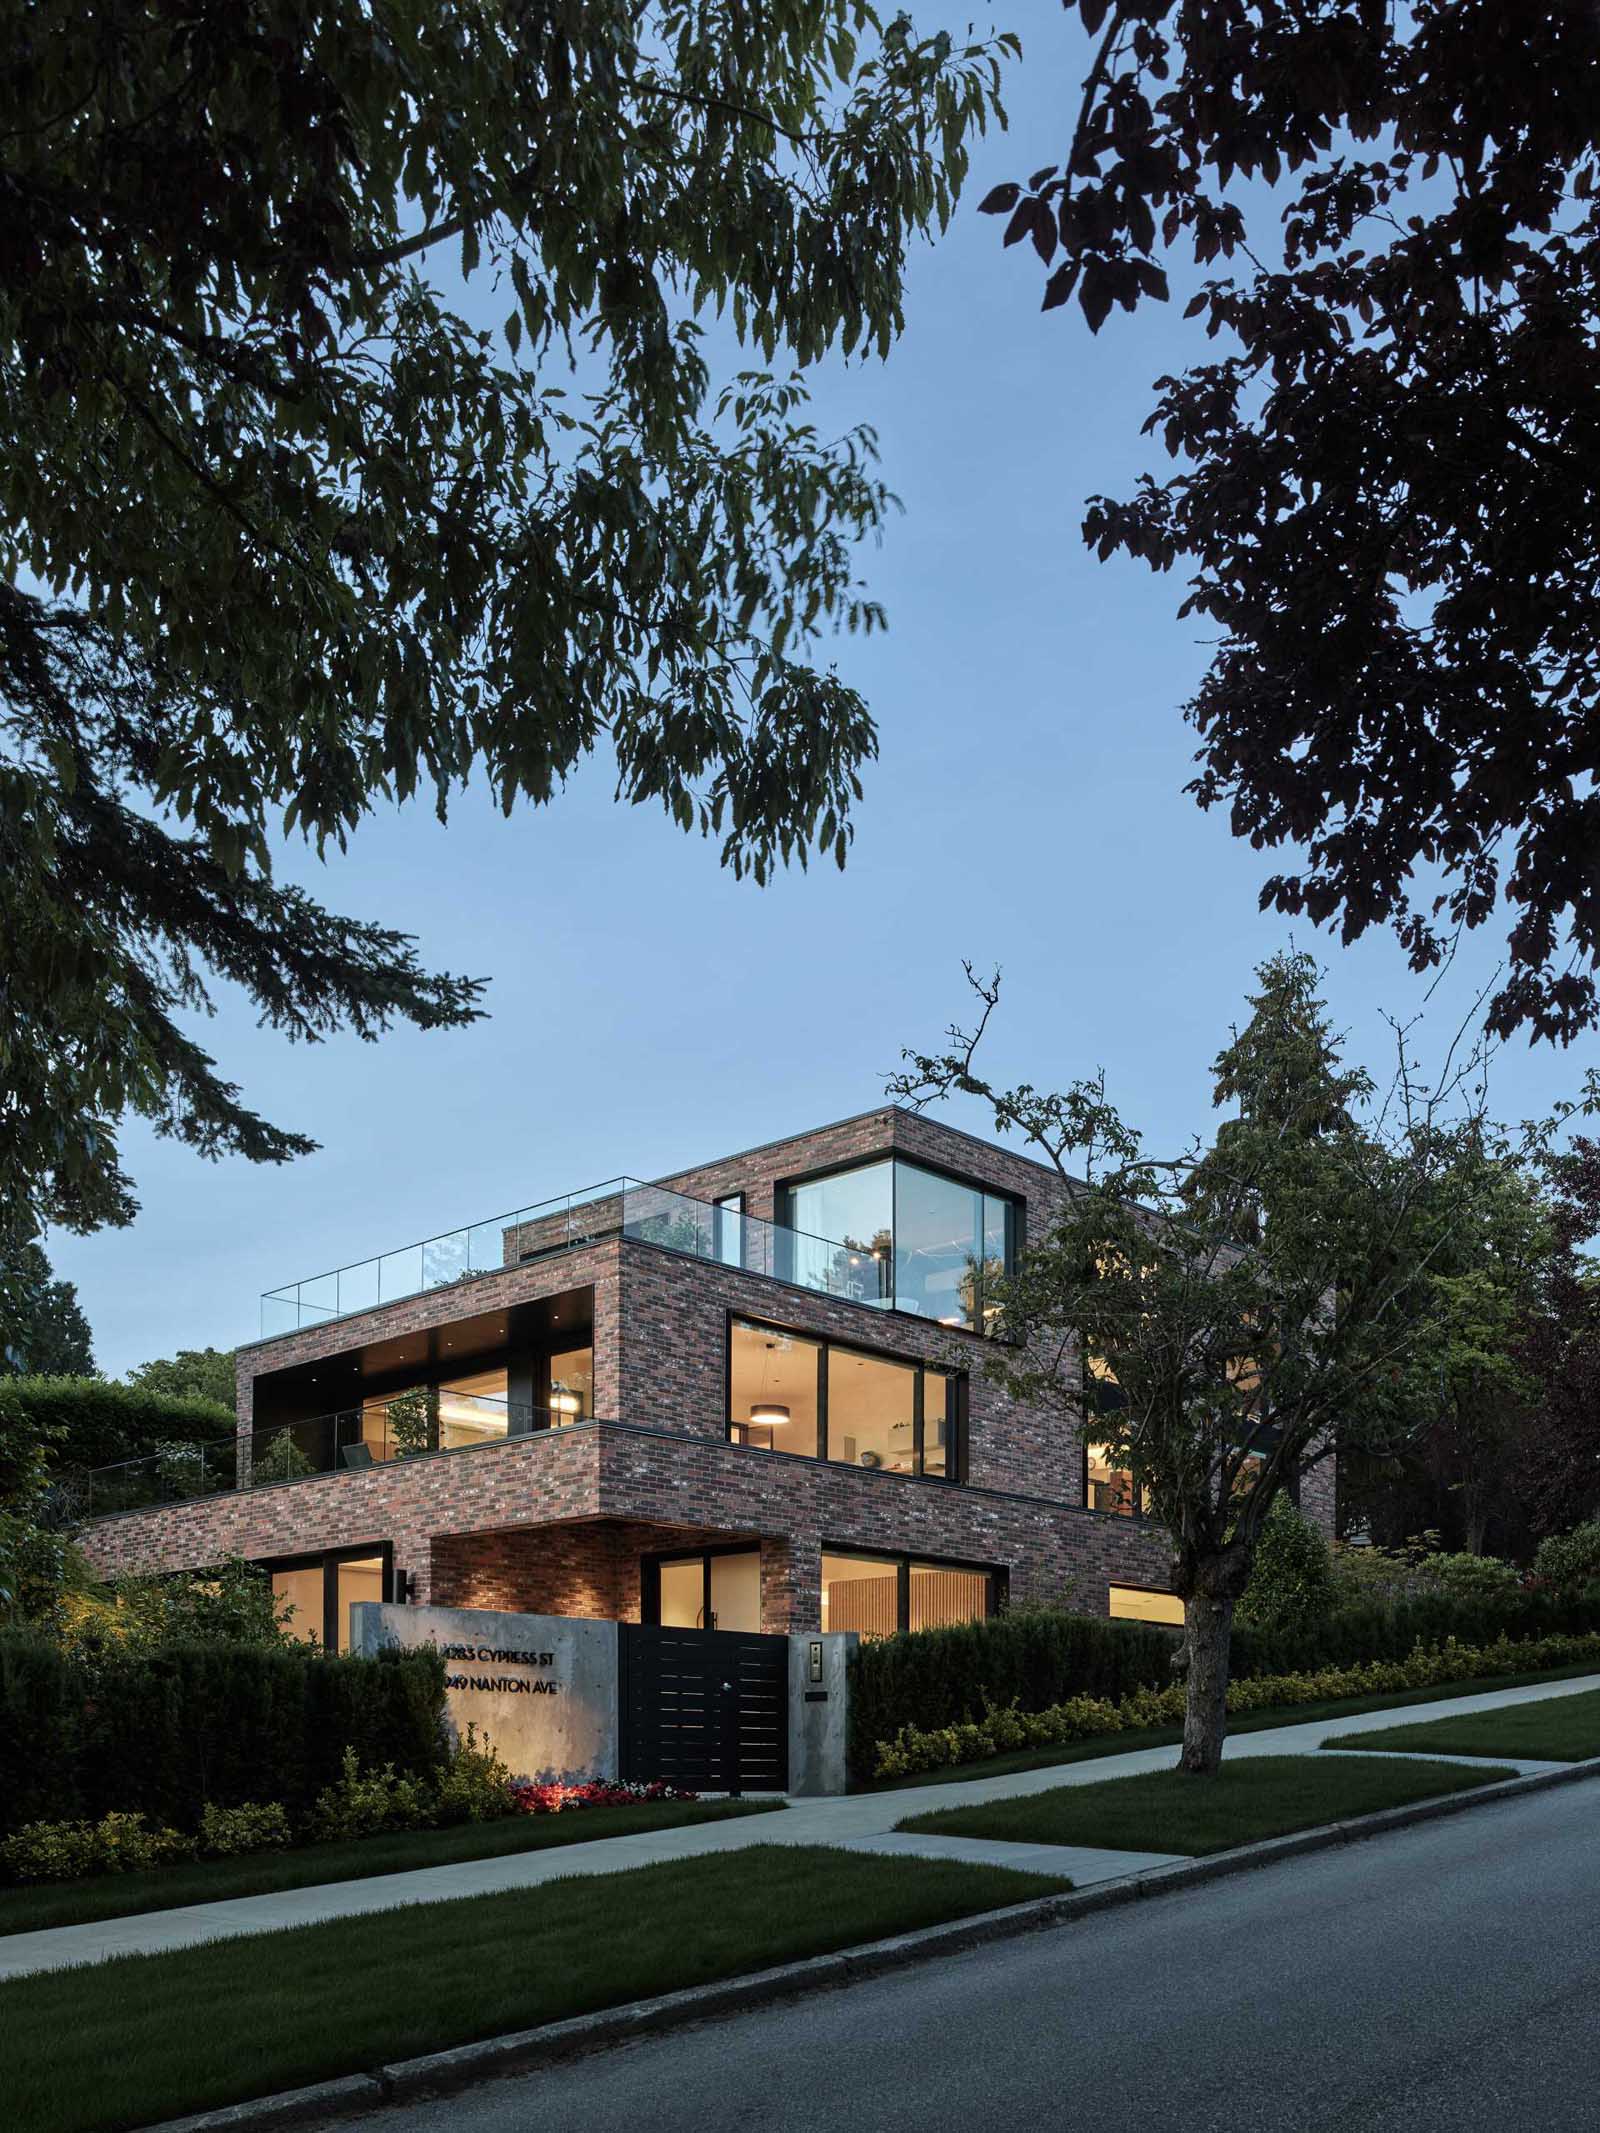 A modern brick house with a staggered design, has black window frames and glass railings.